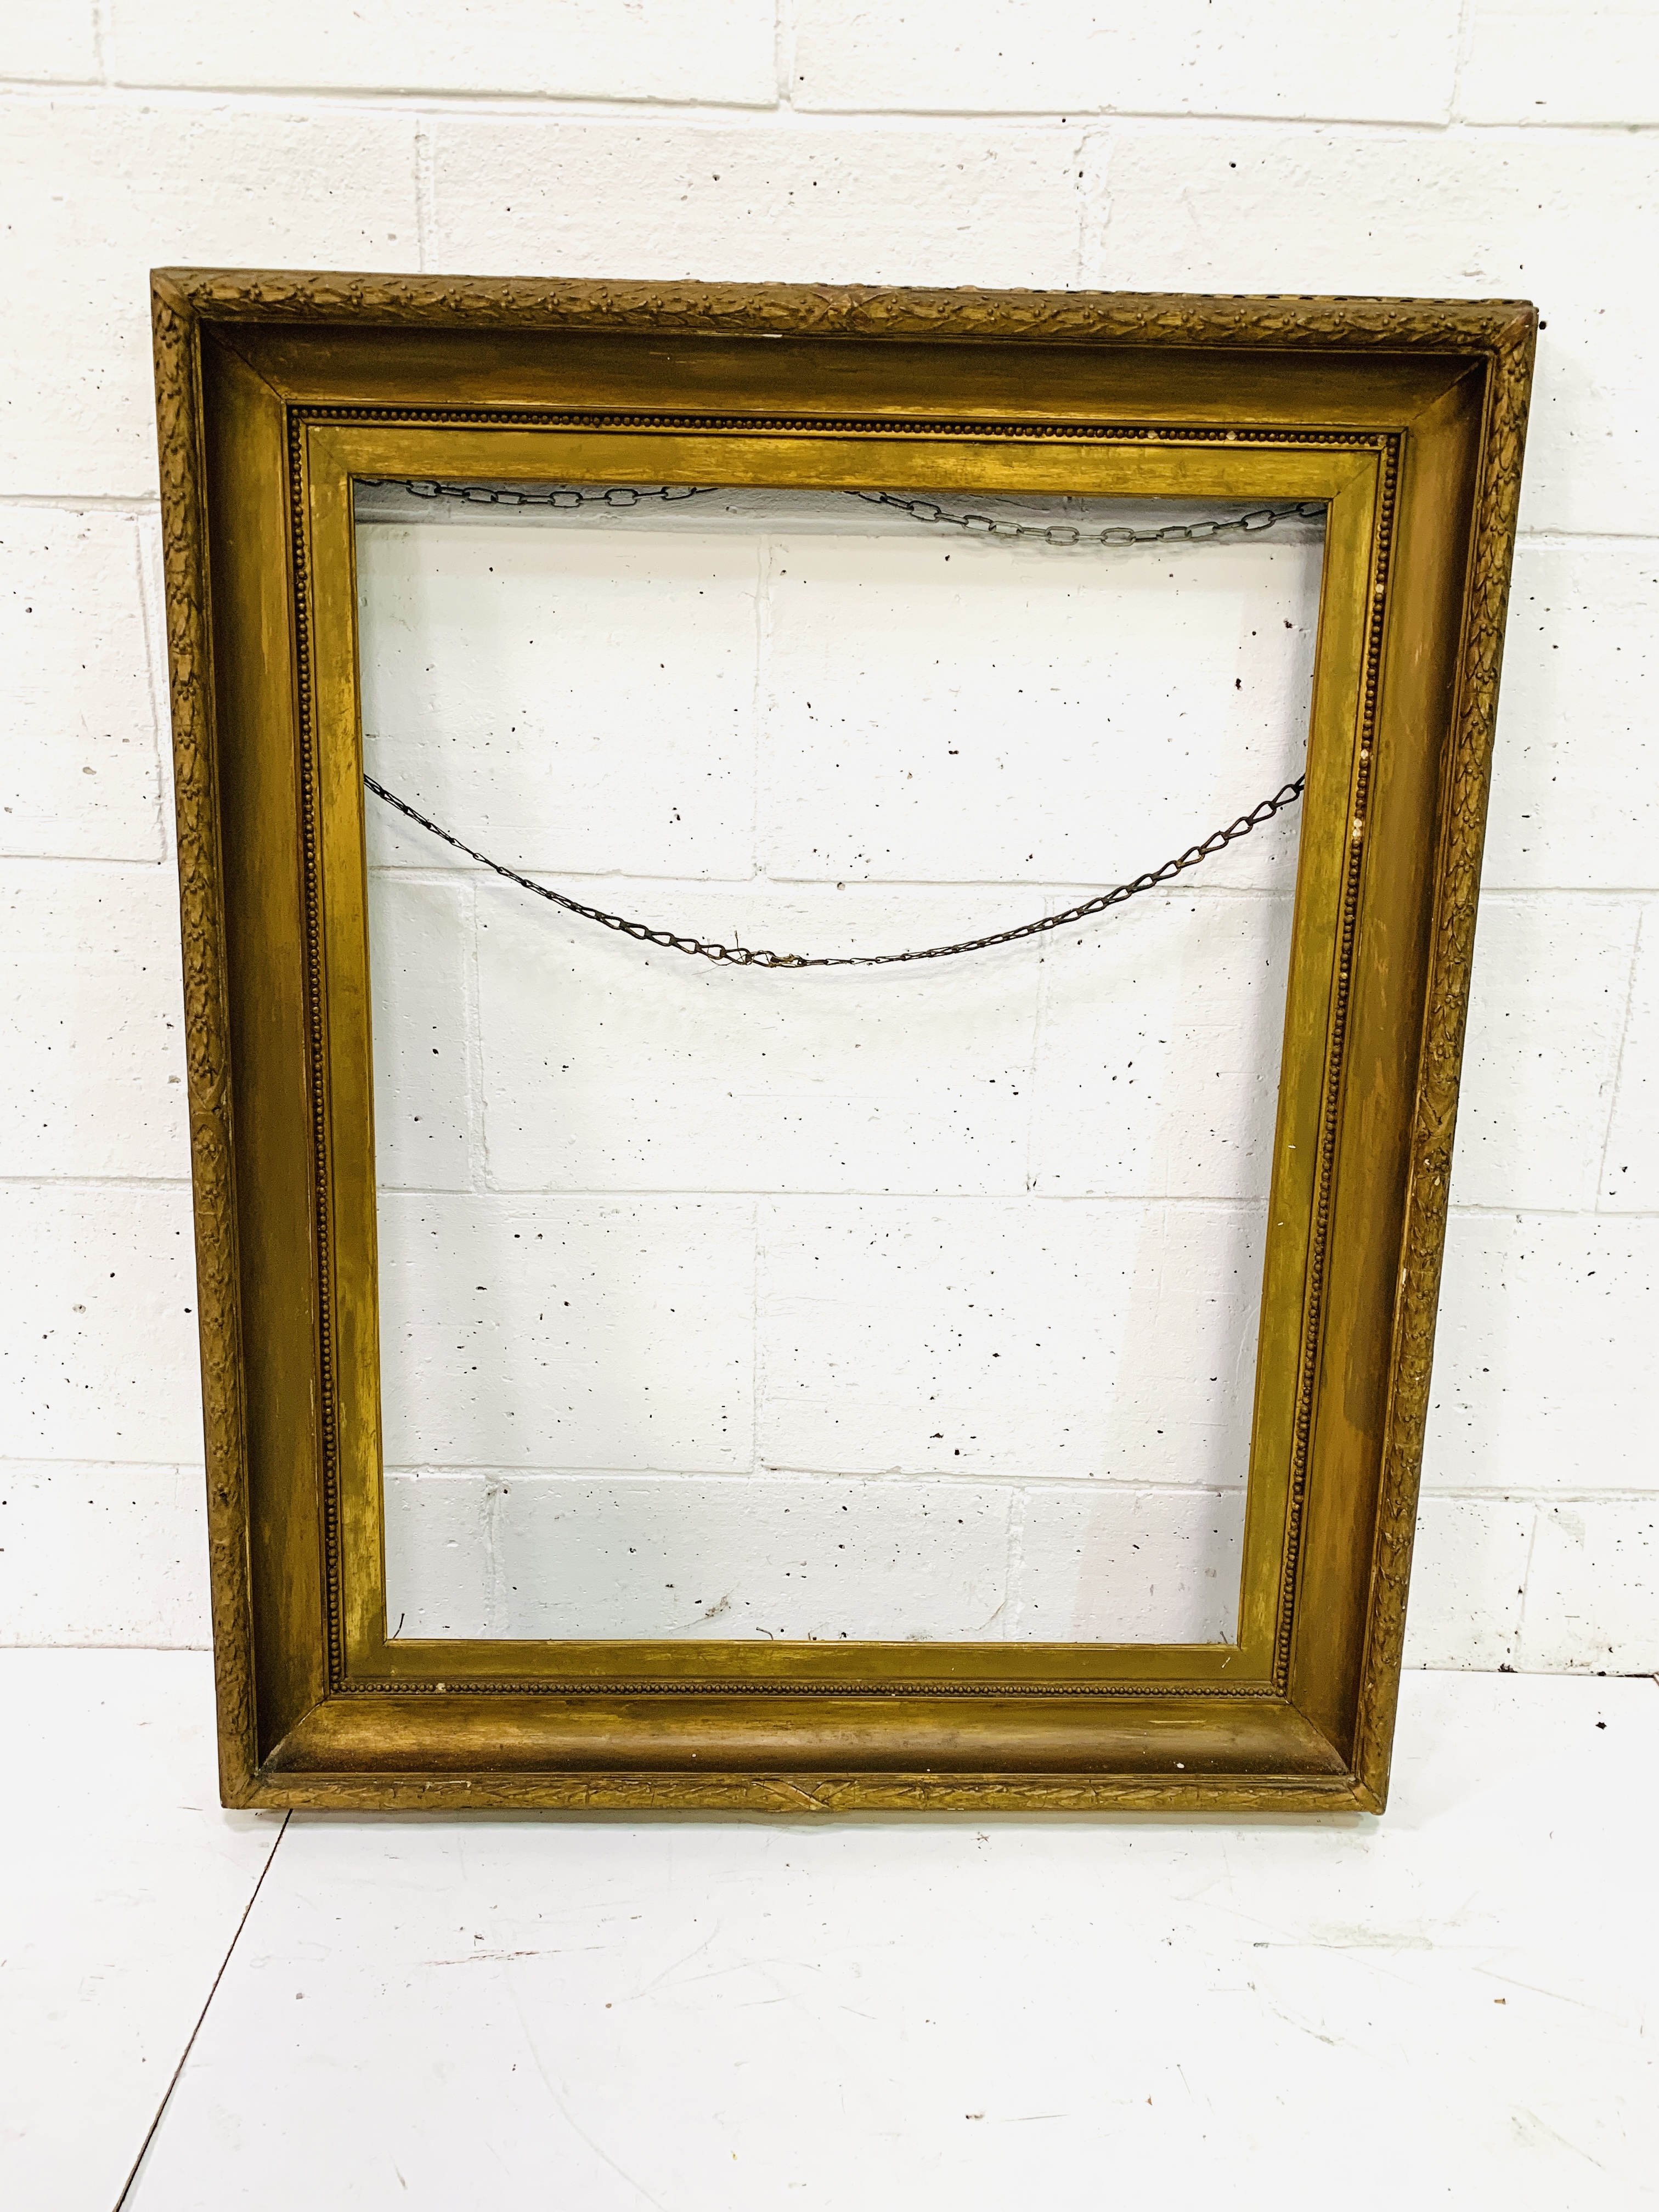 Gilt wood and plaster decorative picture frame - Image 3 of 3